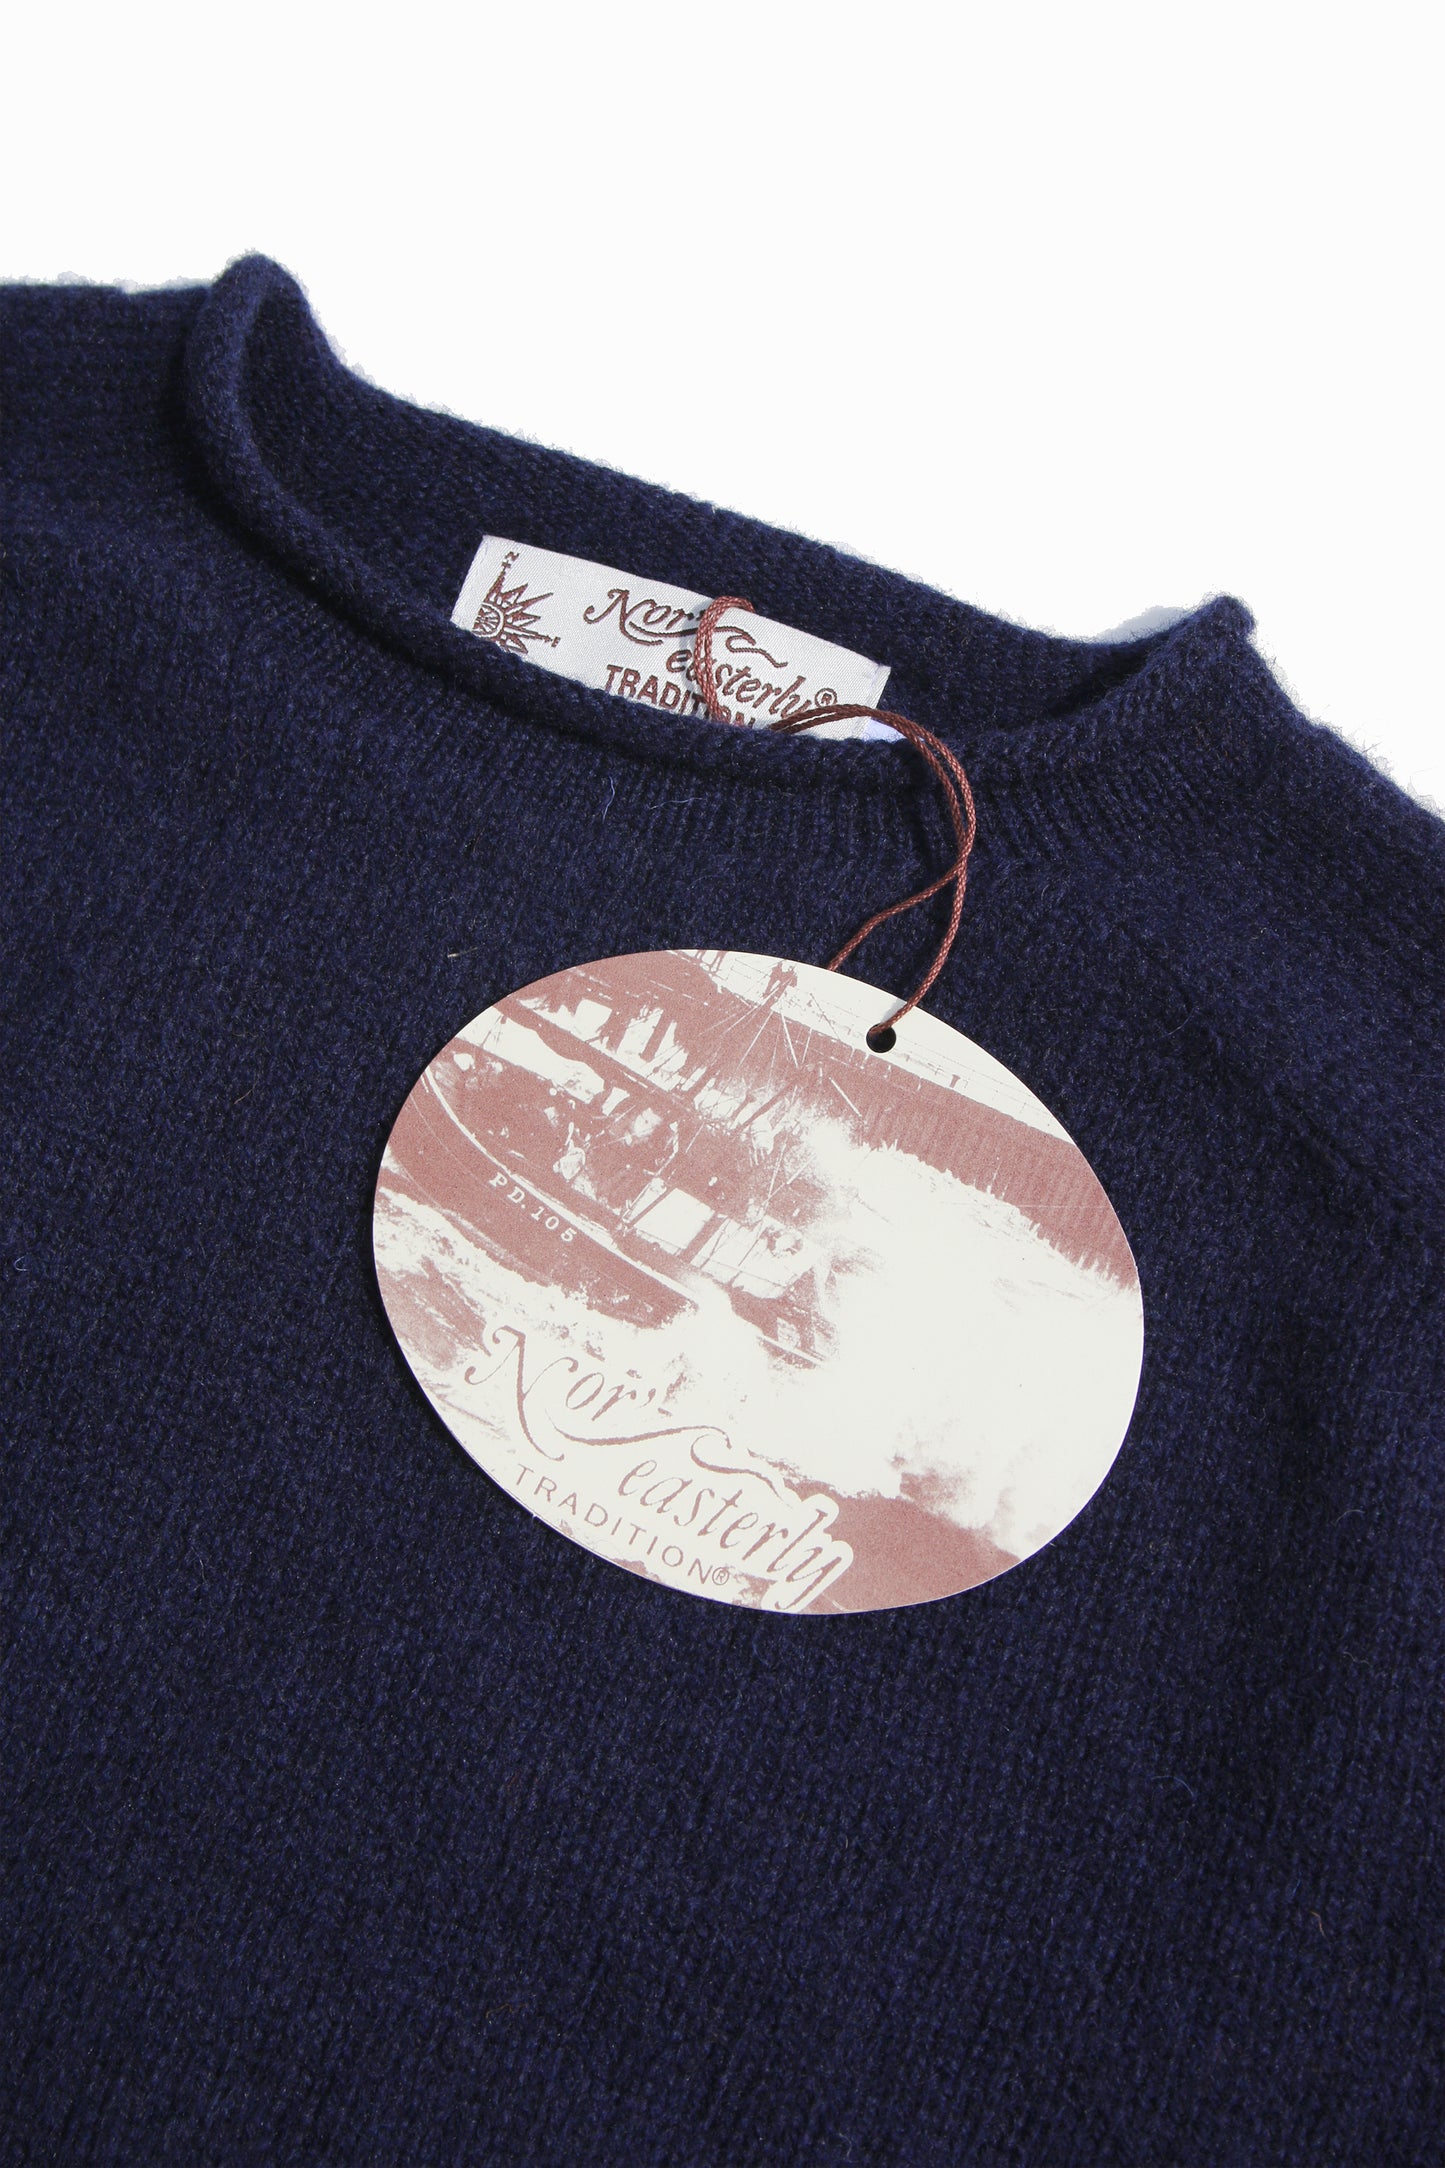 NOR’EASTERLY SCOTLAND L/S ROLL NECK KNIT - NEW NAVY